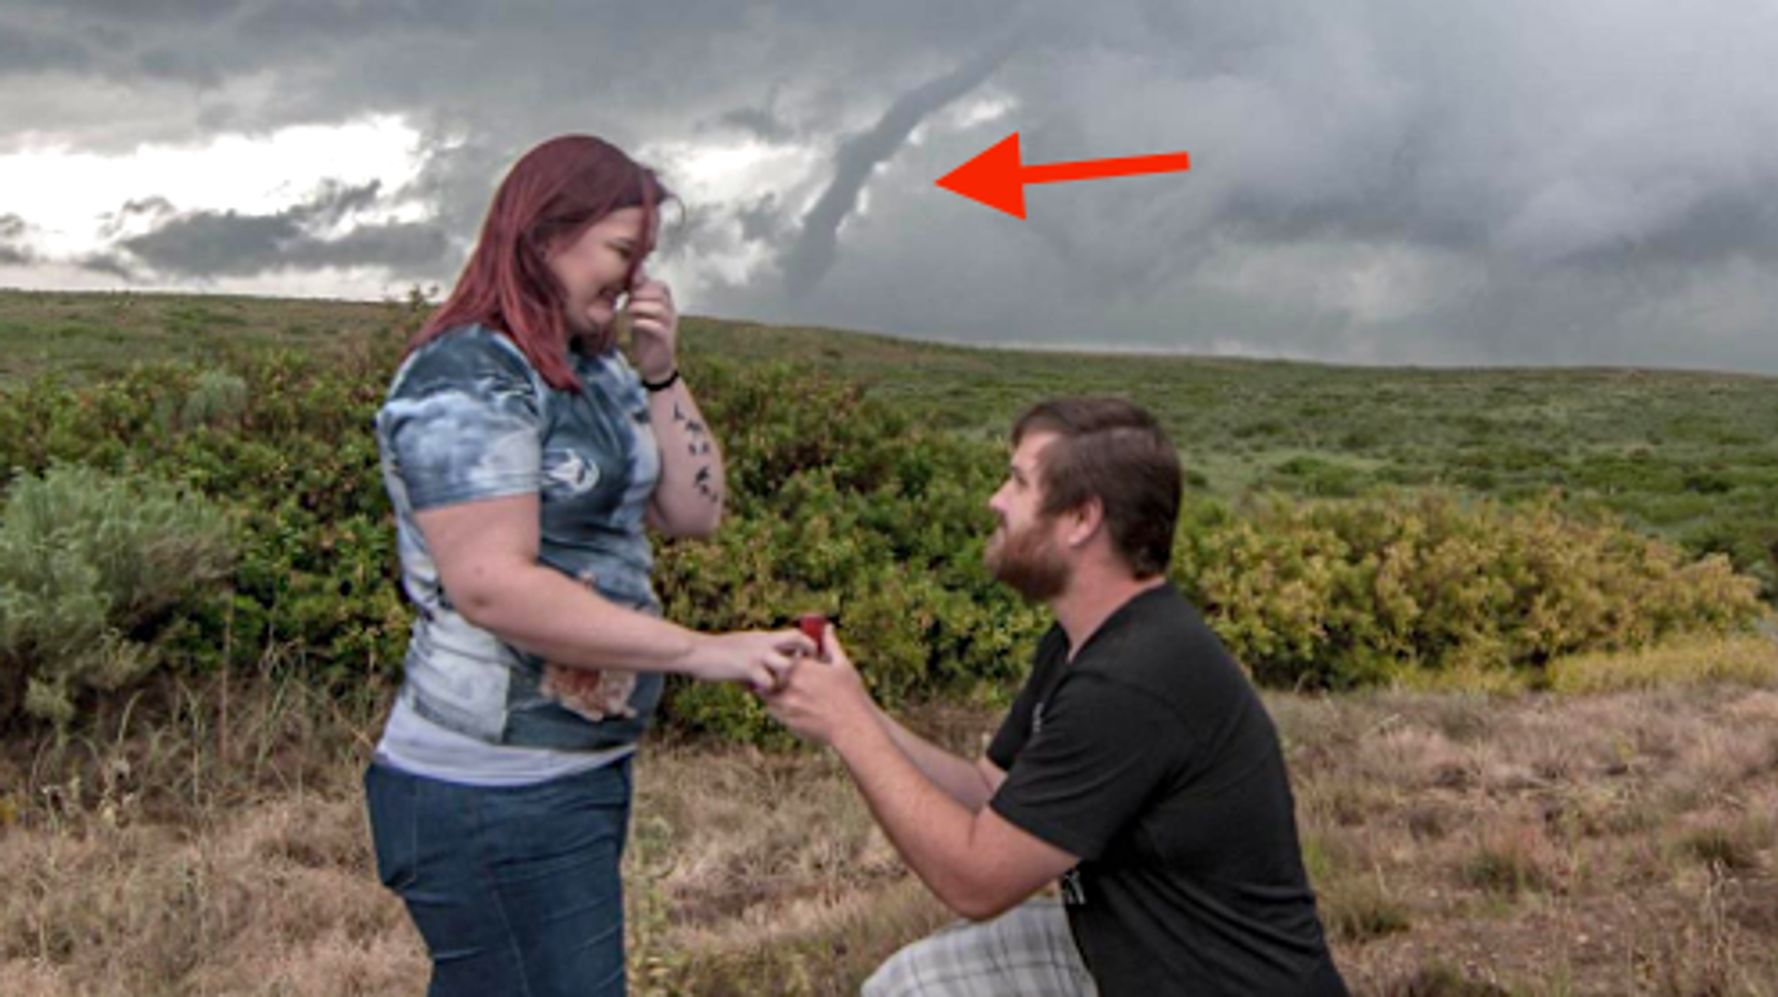 Terrifying Tornado Gives Couple A Proposal Story Theyll Never Forget 0178